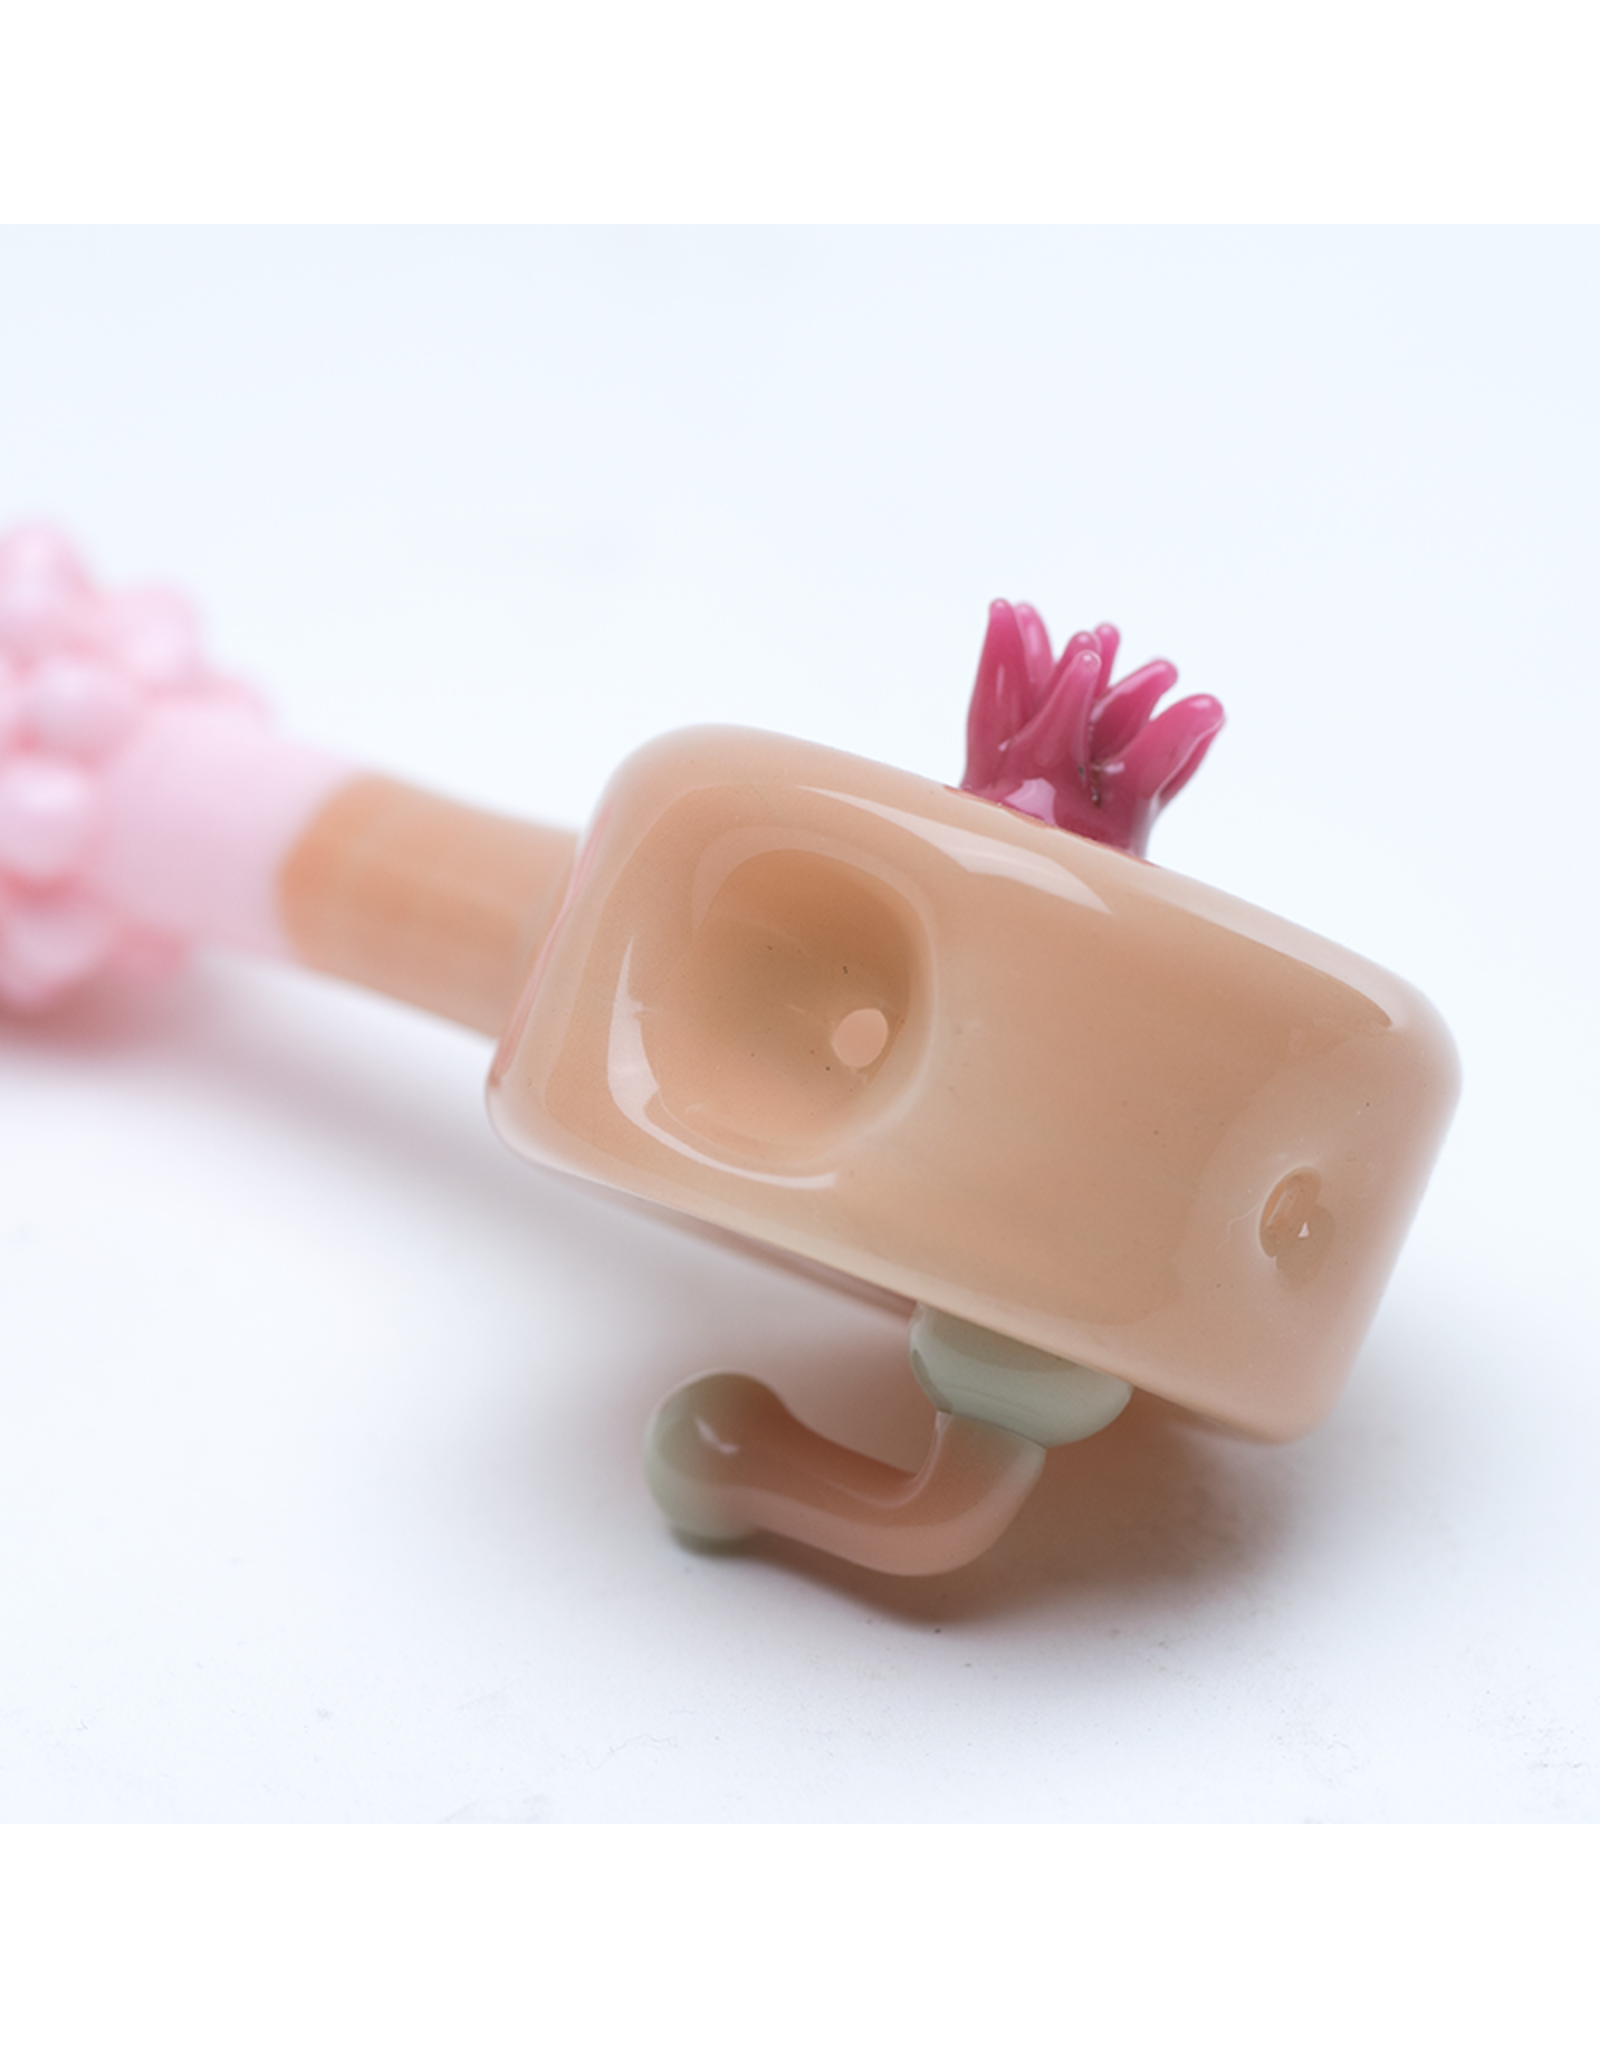 Empire Glass Rick And Morty Plumbus pipe